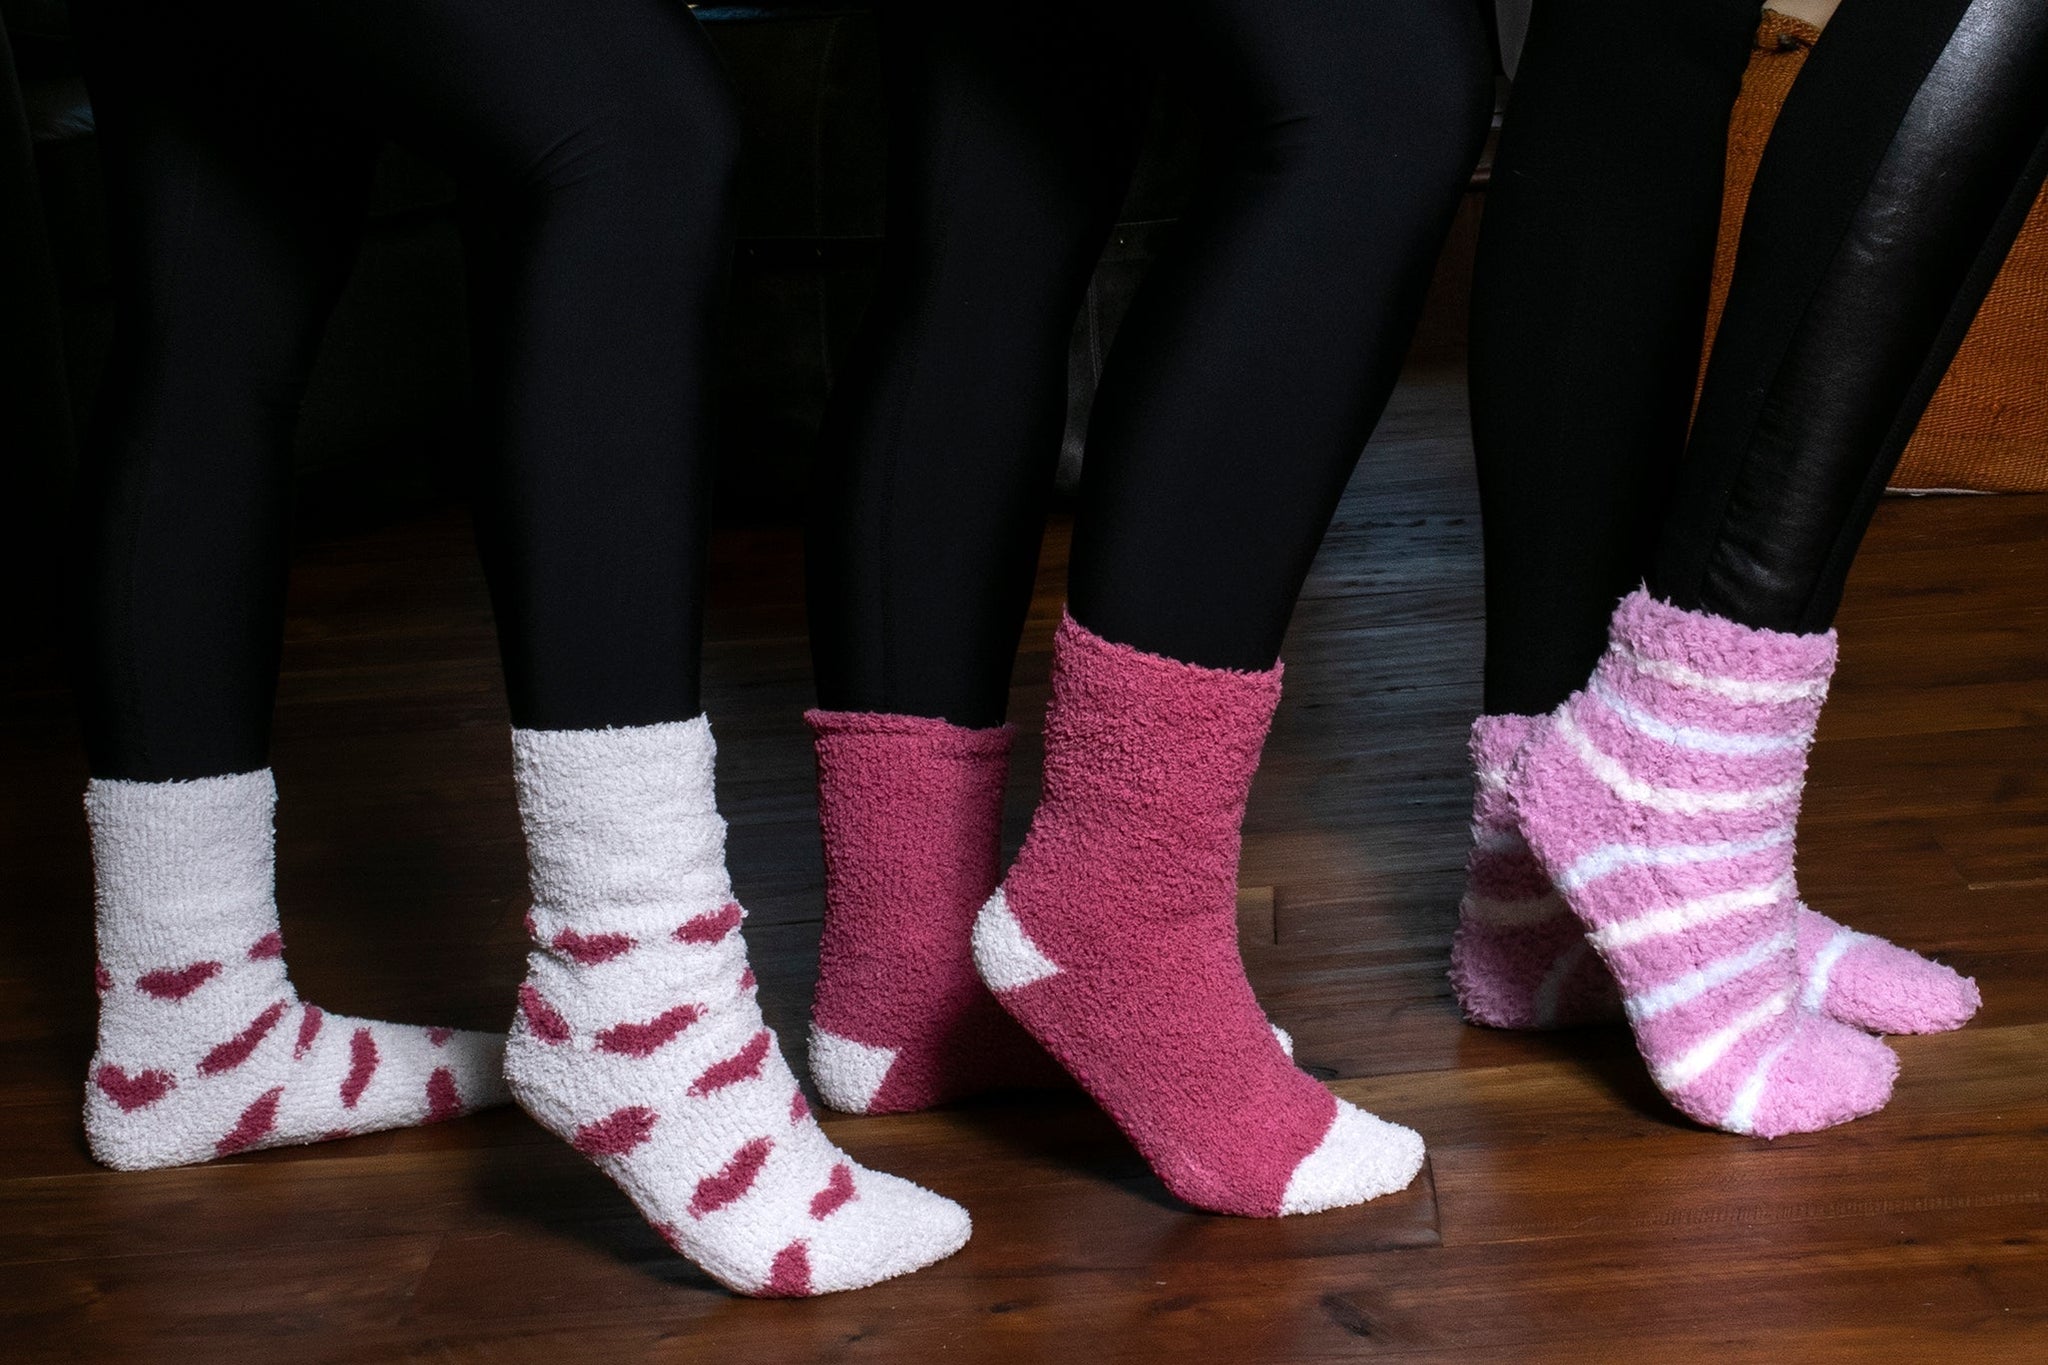 2 Pairs - Velvet Warm Soft and Fuzzy Slipper Socks With Lavender Infused